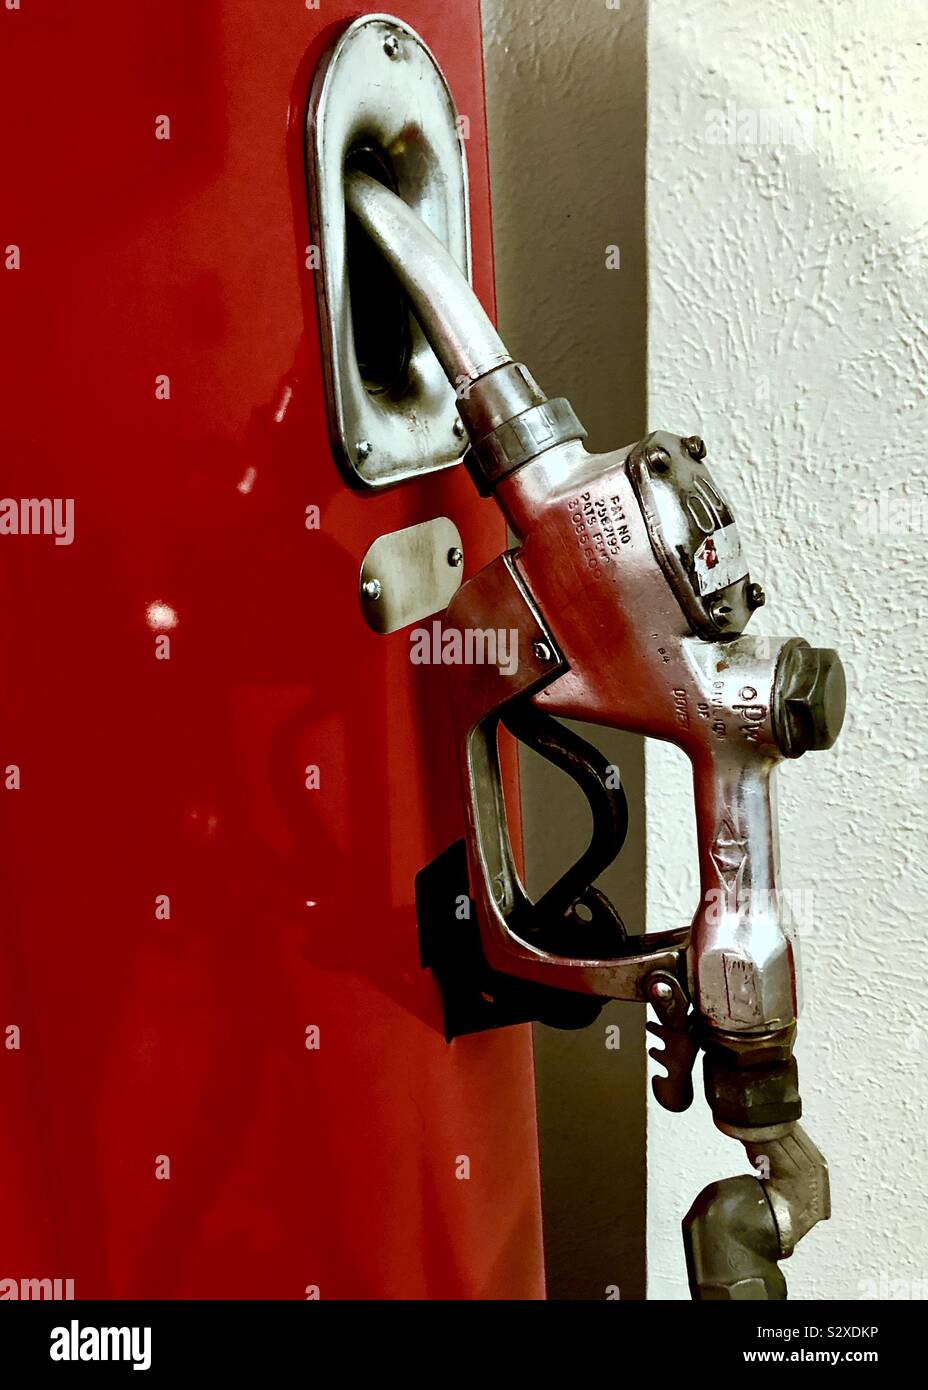 Antique gasoline nozzle on red and white background Stock Photo